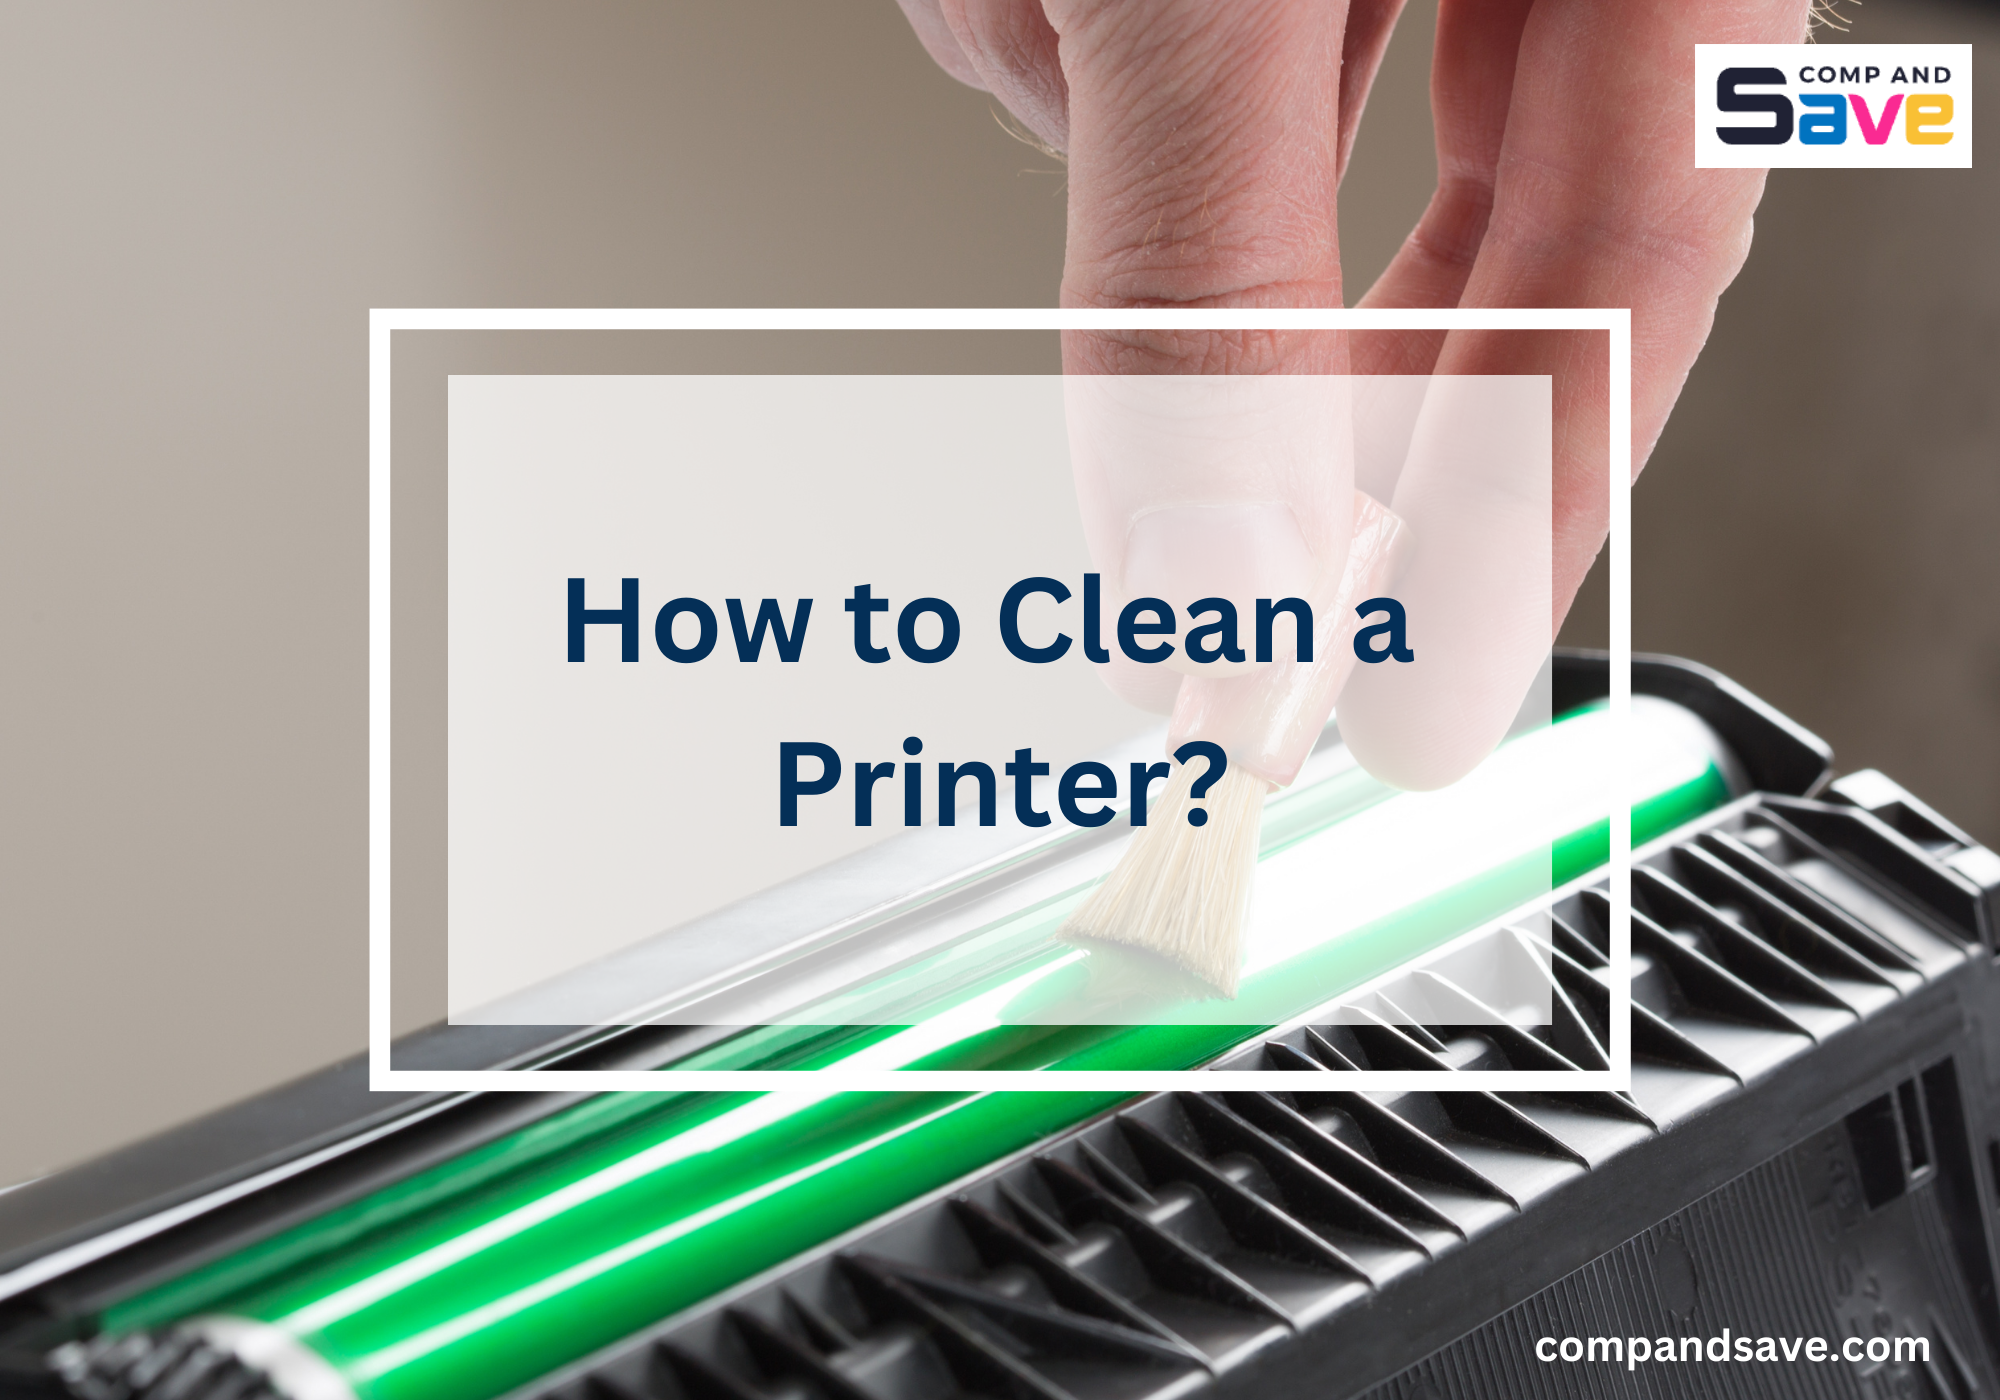 image from How to Clean a Printer: Guide for Inkjet and Laser Printers